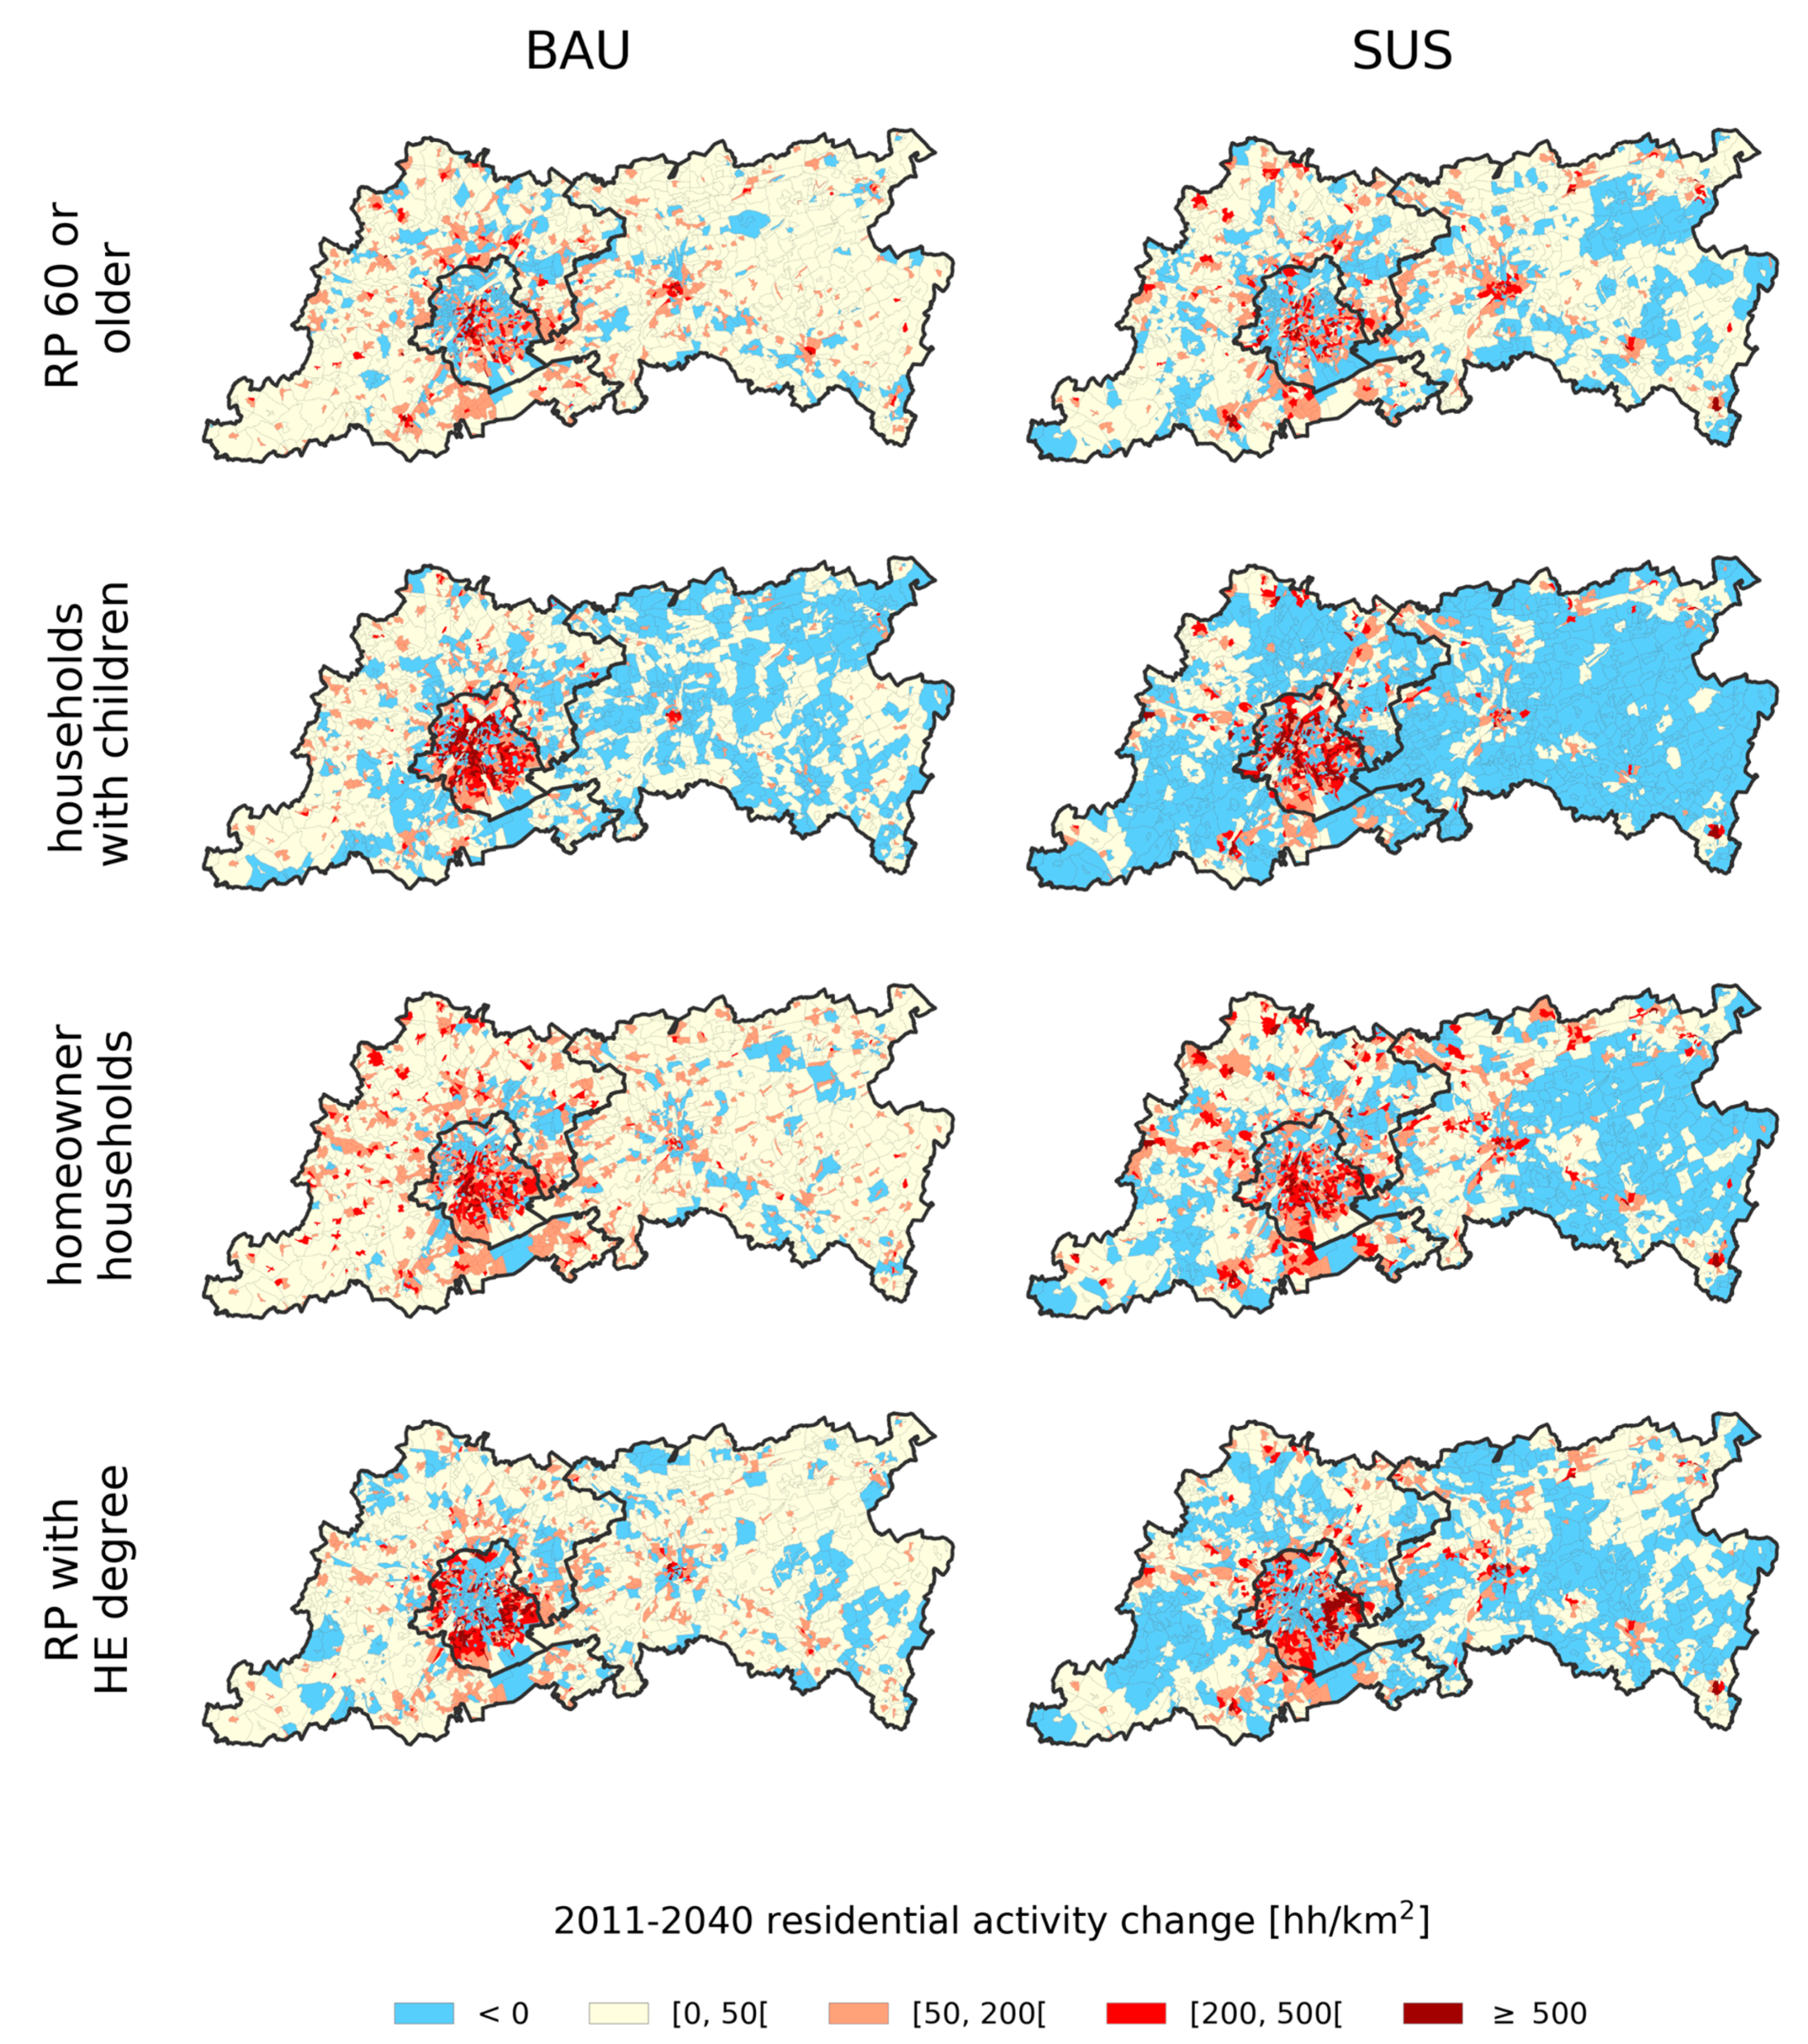 Mount Bank chauffør Løfte Sustainability | Free Full-Text | Microsimulation of Residential Activity  for Alternative Urban Development Scenarios: A Case Study on Brussels and  Flemish Brabant | HTML